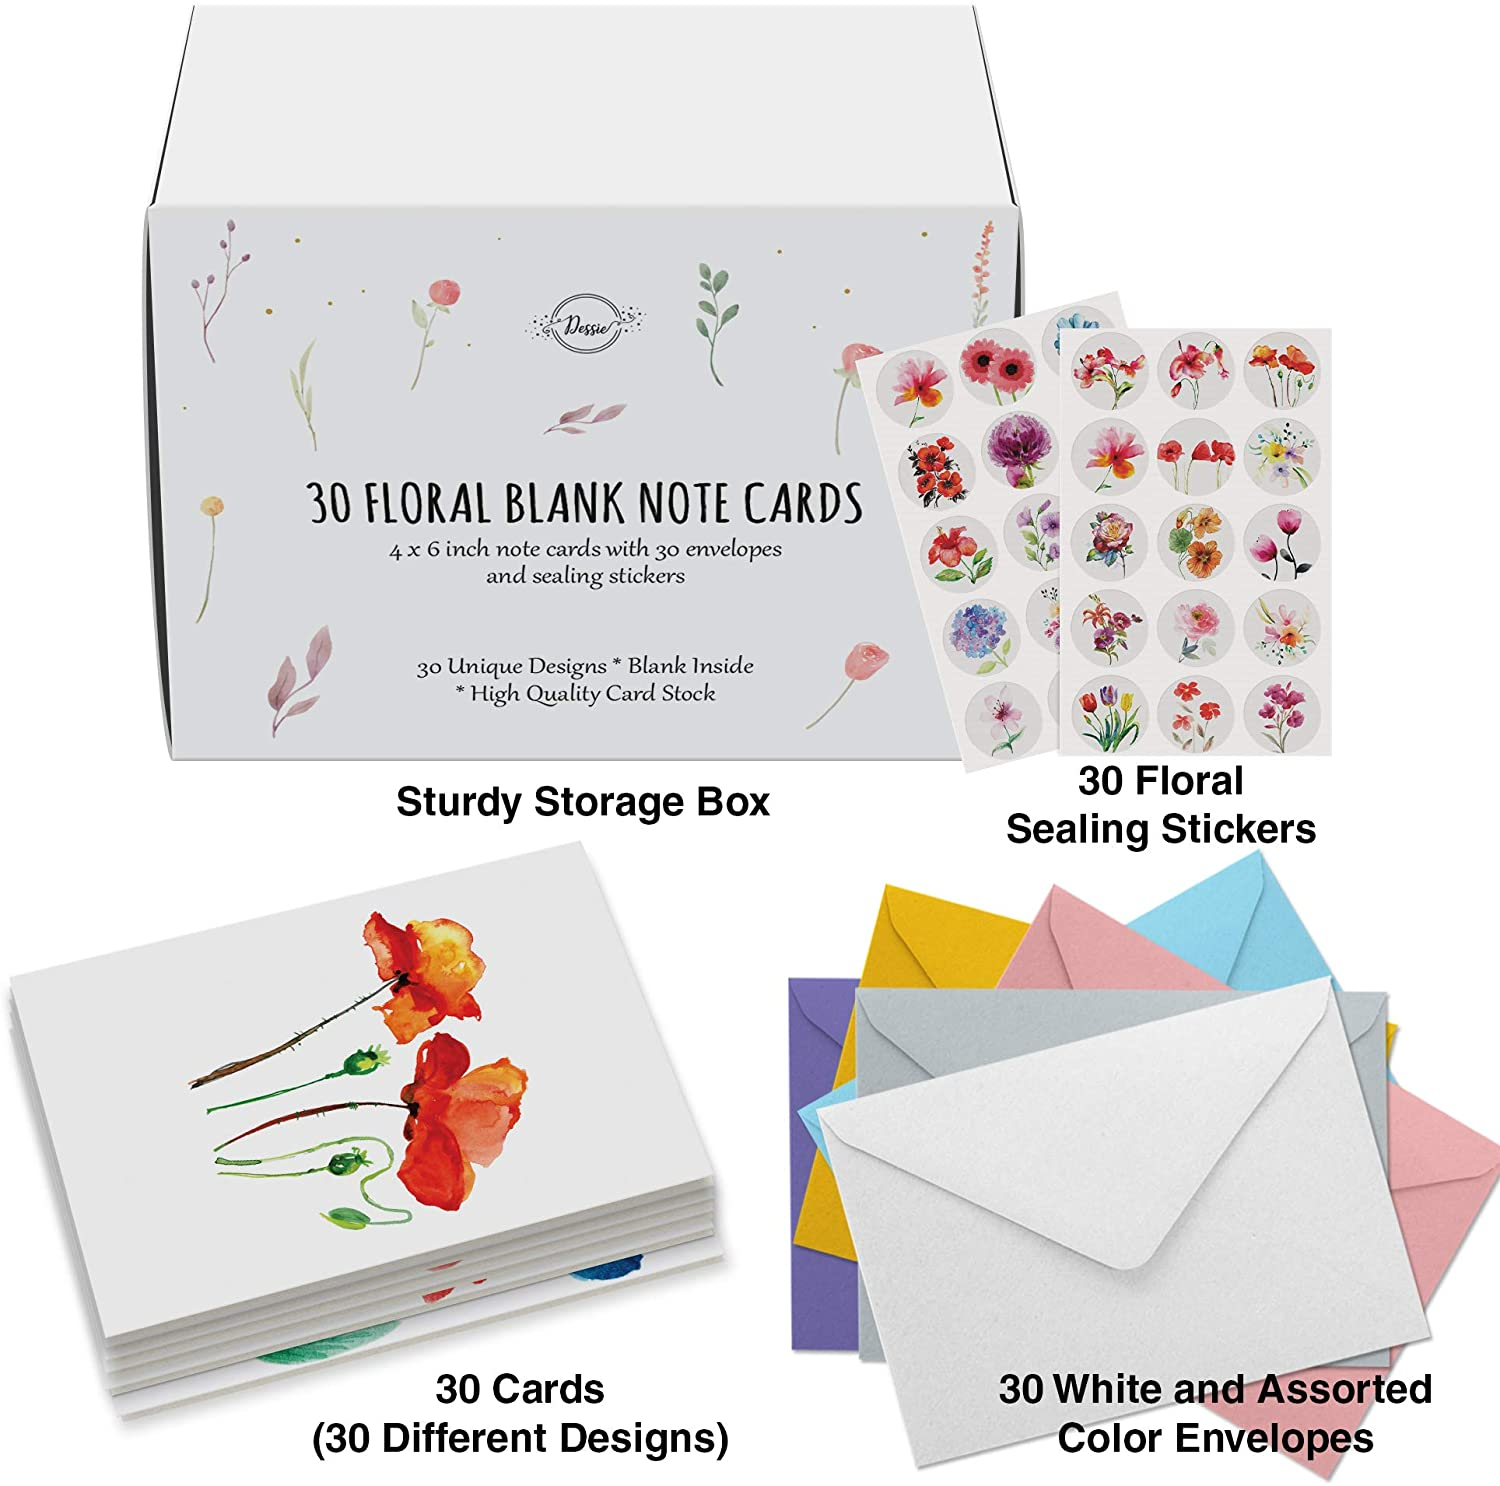 Dessie 30 Floral Watercolor Blank Cards with Envelopes - 30 Different 4x6 inch Blank Greeting Cards w/Assorted Color Envelopes & Matching Seals.